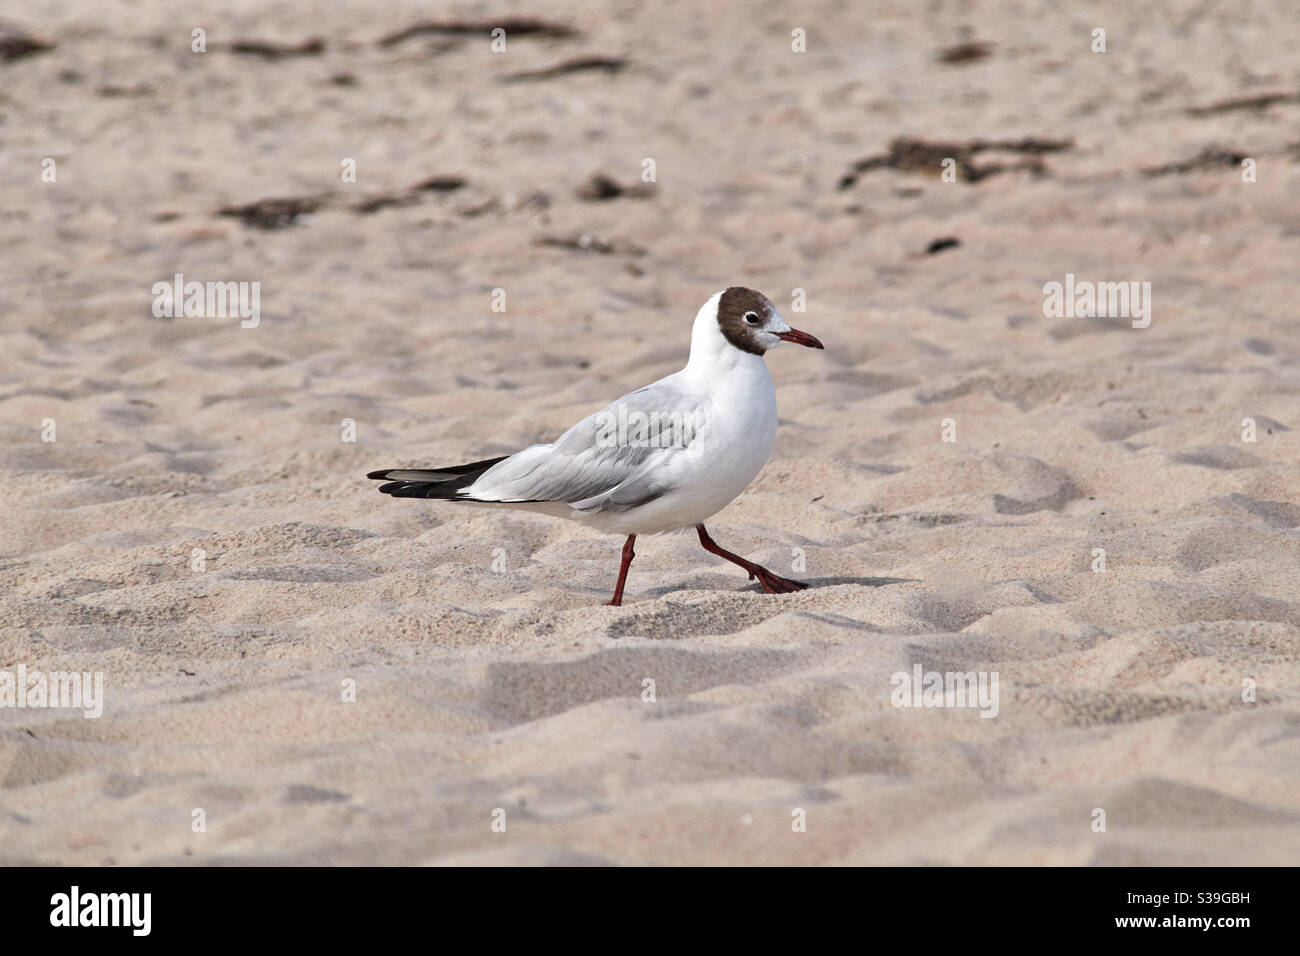 Black-headed gull Chroicocephalus ridibundus runs across the beach on the search for food in fine sand. The red beak is clearly visible Stock Photo